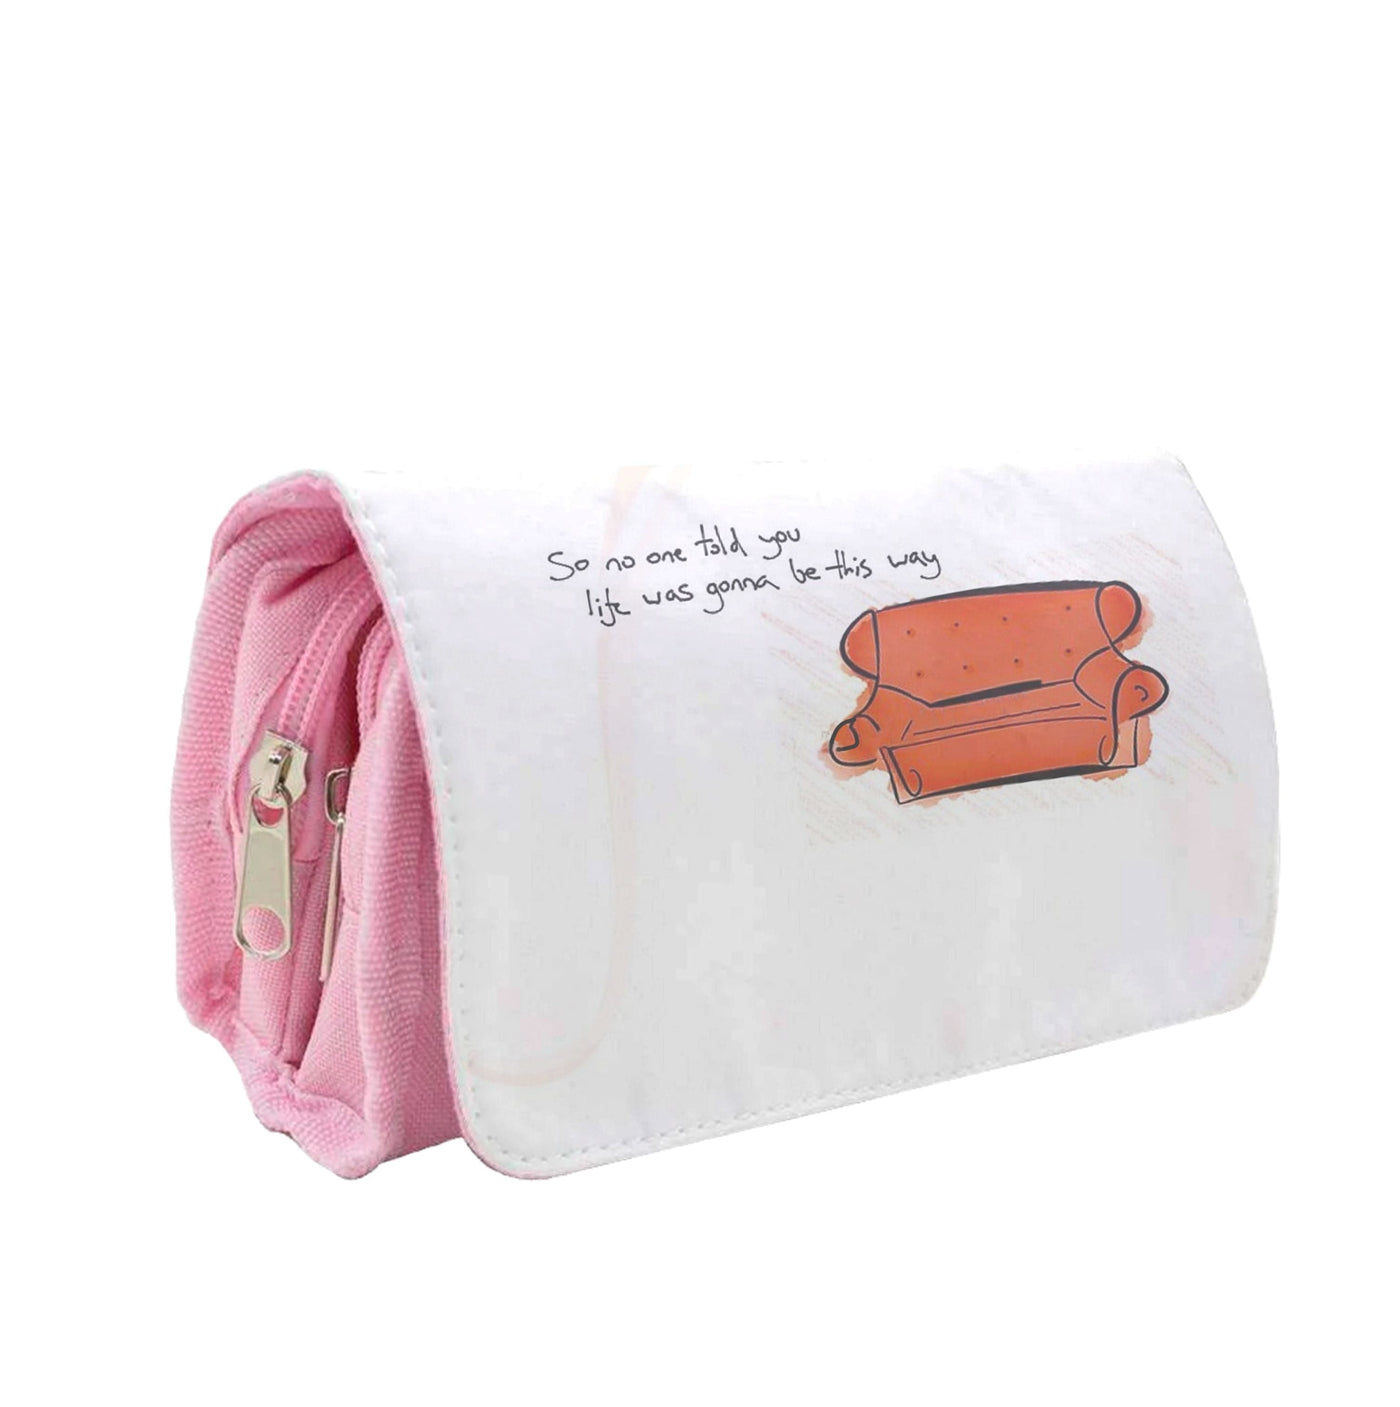 No One Told You Life Was Gonna Be This Way - Friends Pencil Case